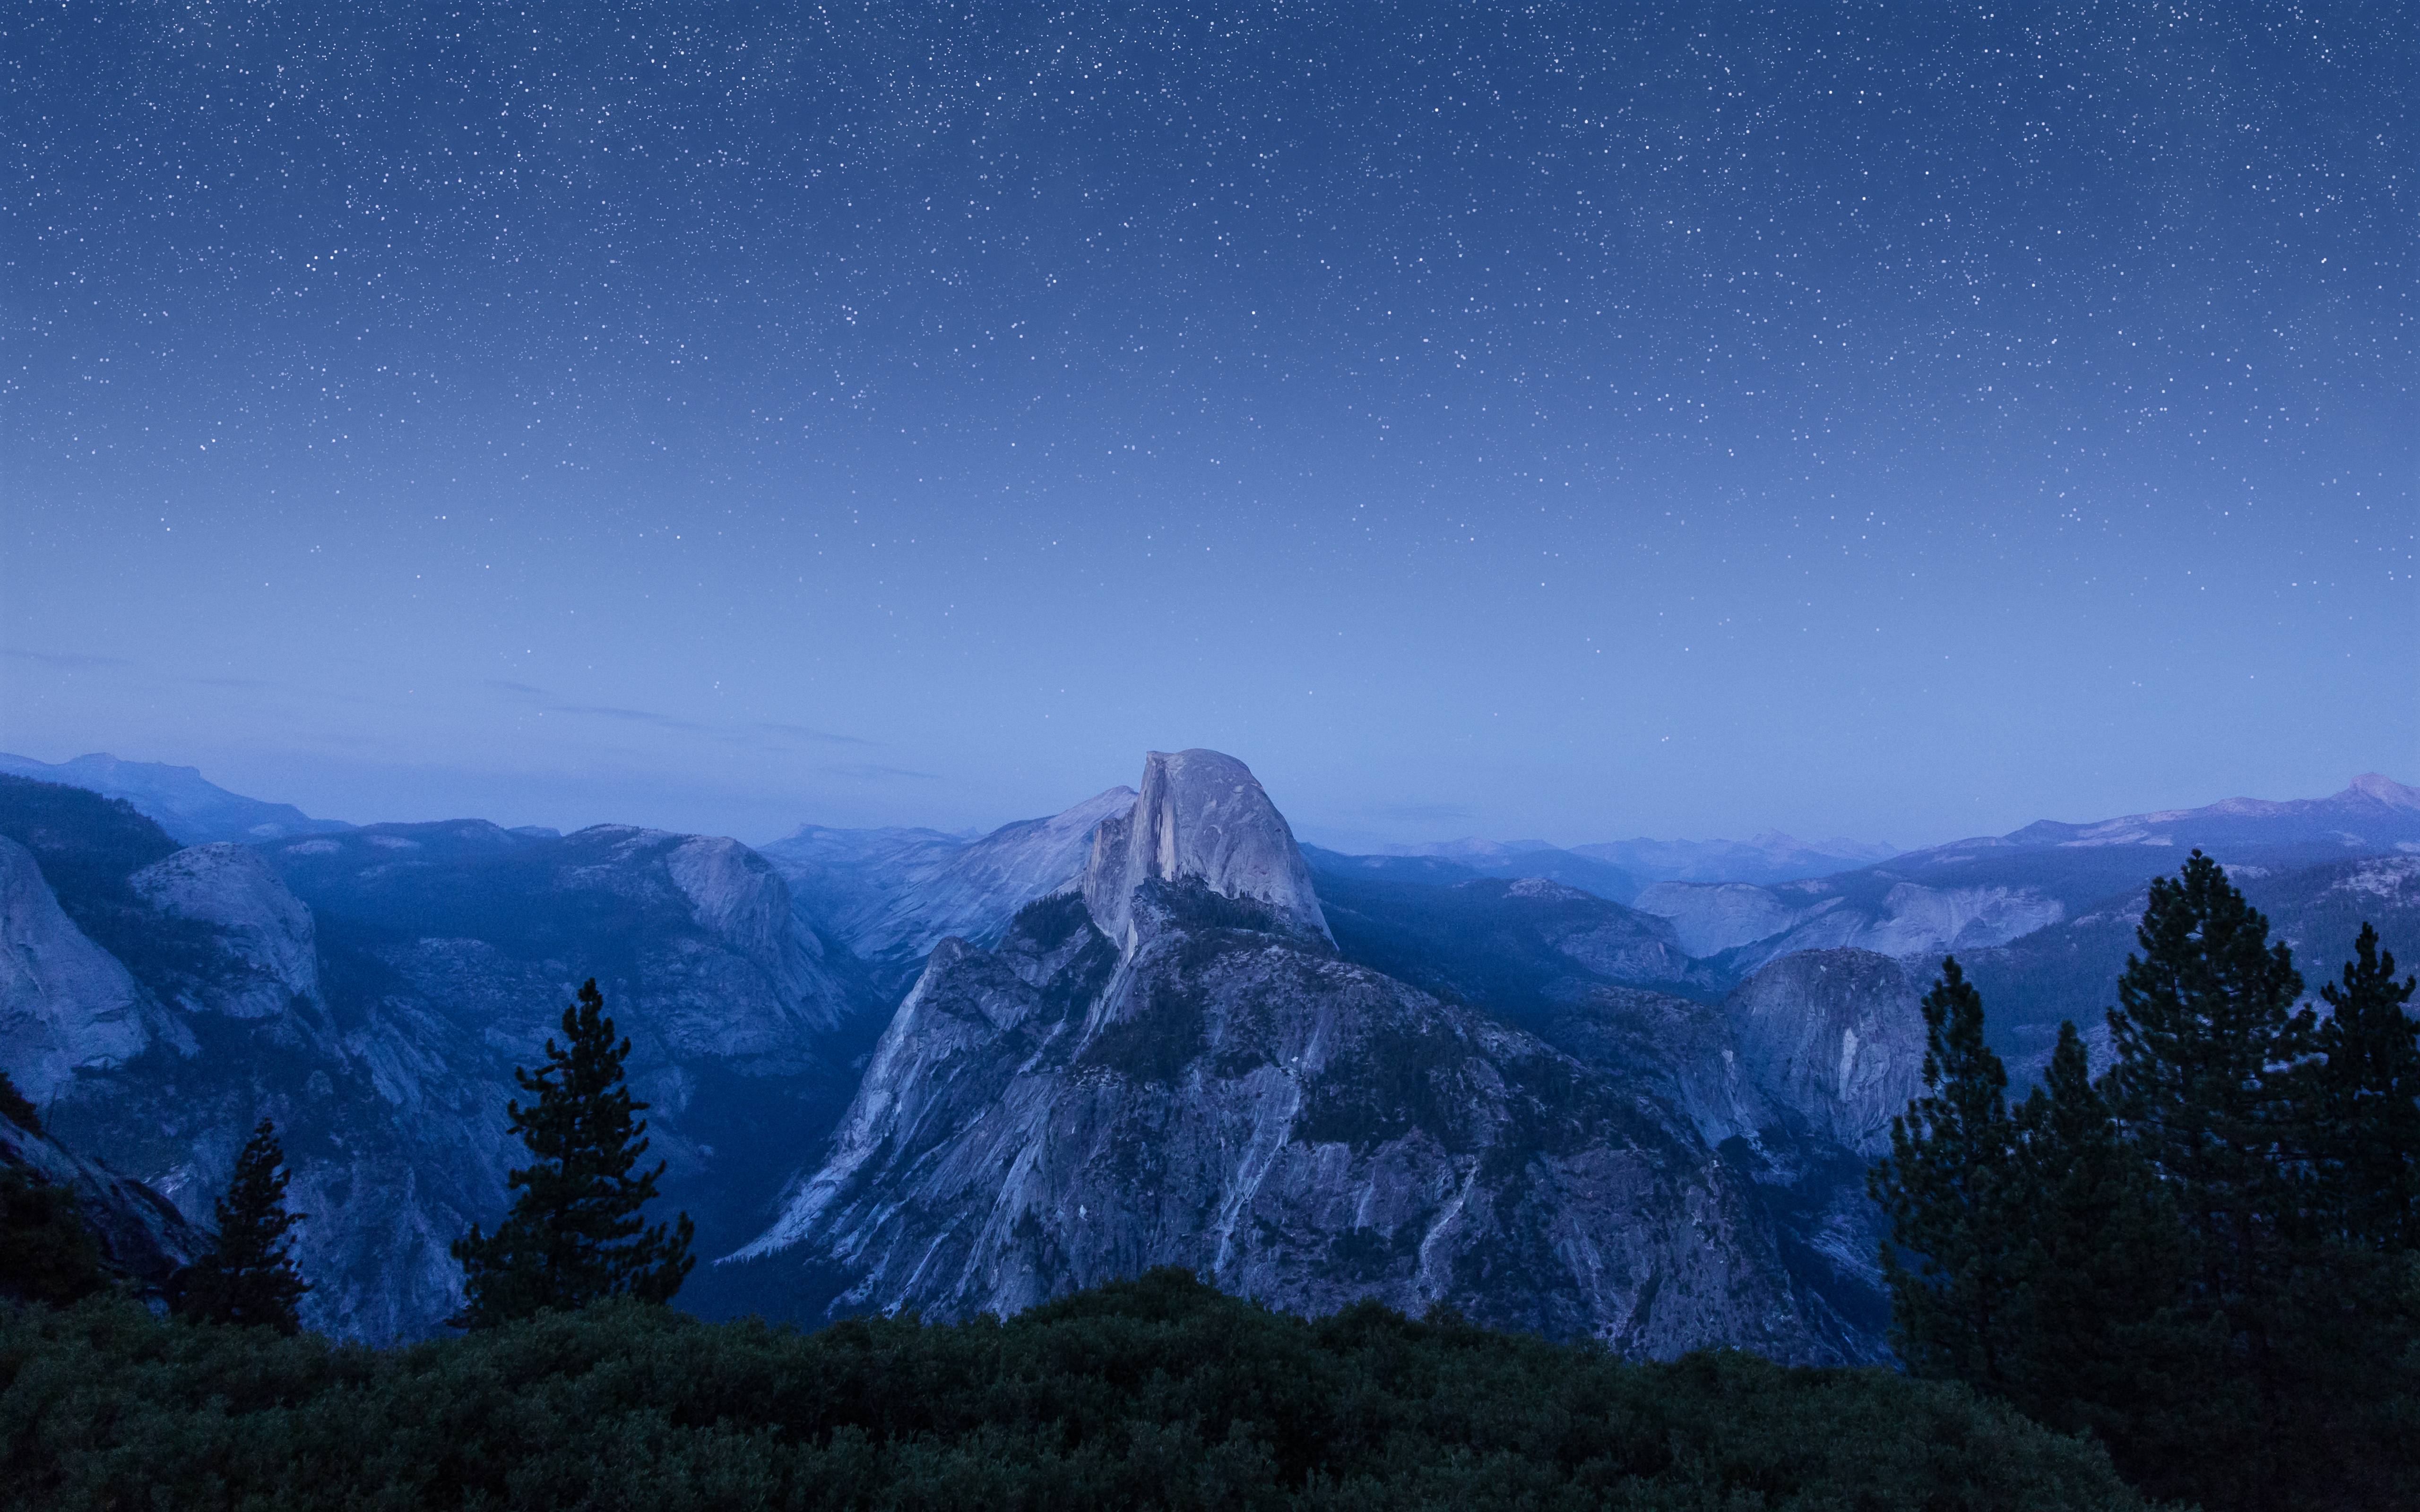 How To Get The Stunning New Os X El Capitan Wallpaper